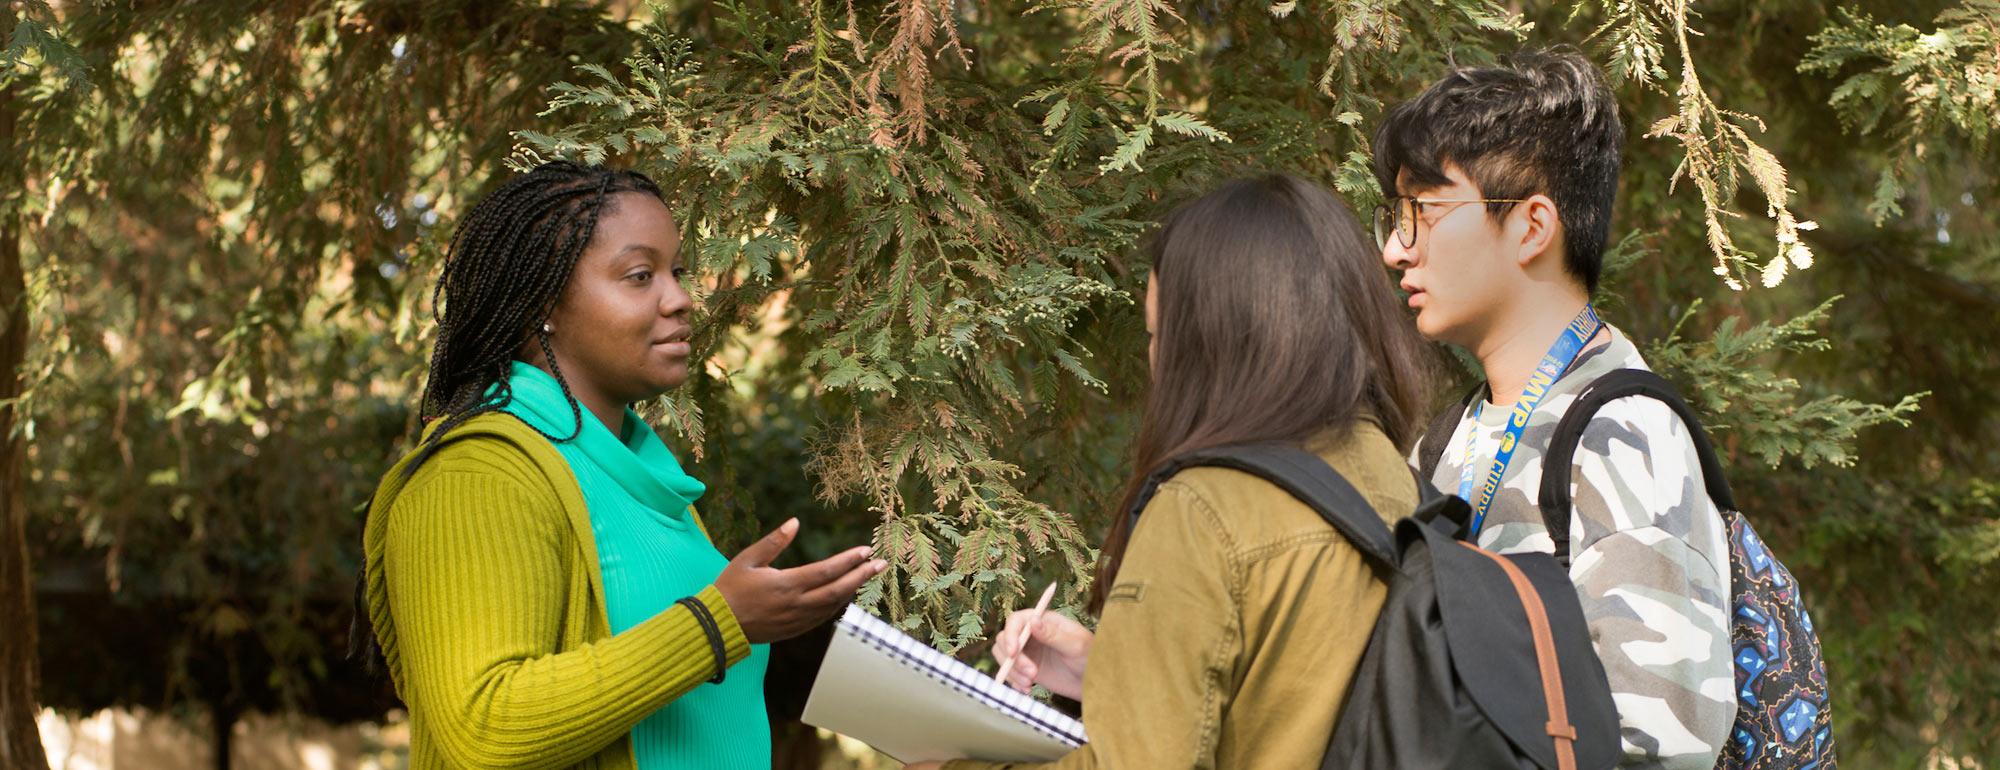 A PHD candidate discusses the Arboretum with students